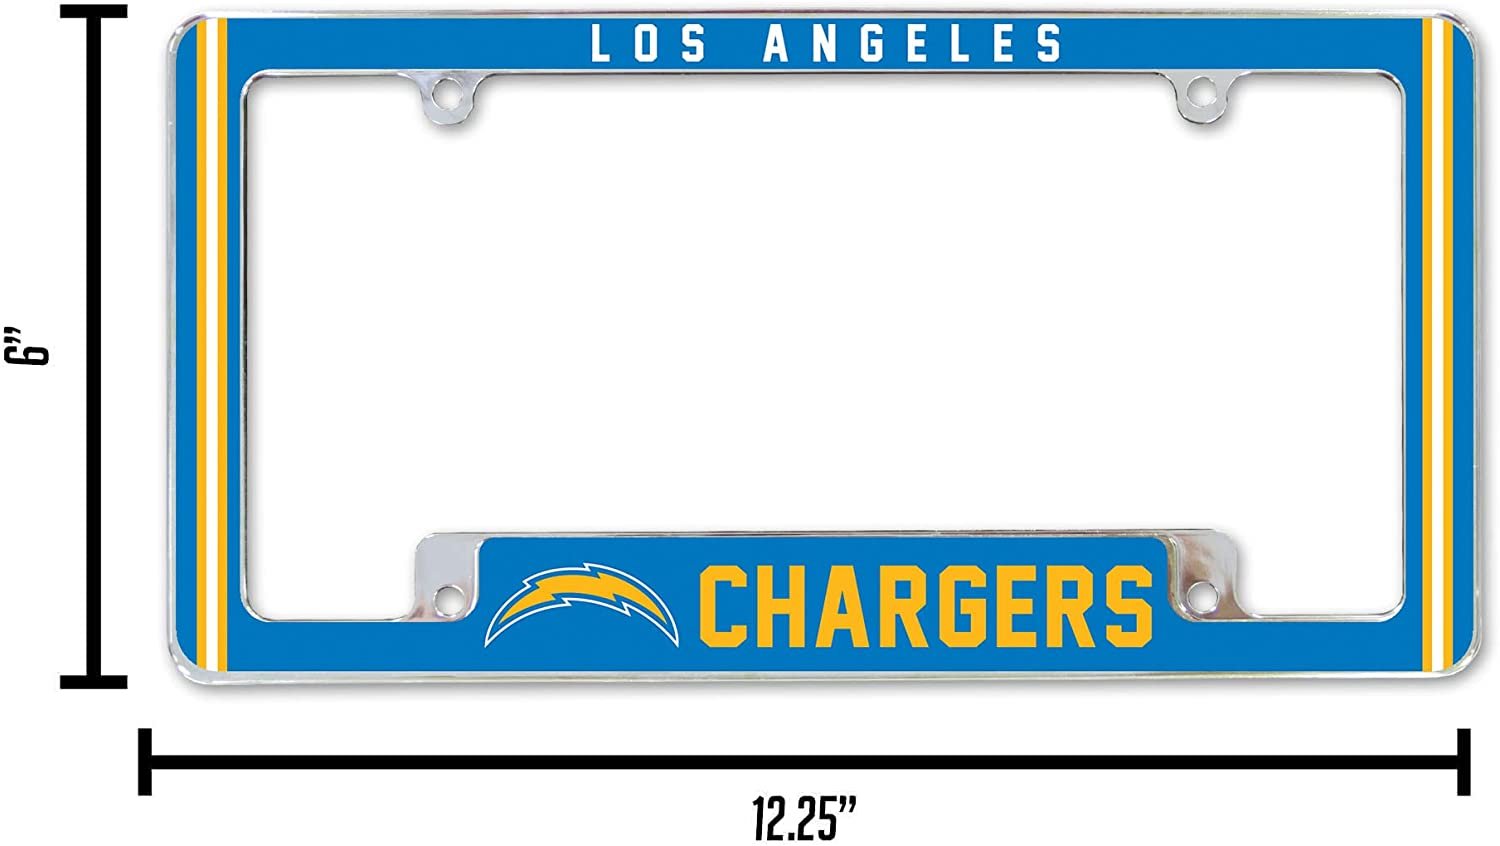 Los Angeles Chargers Metal License Plate Frame Chrome Tag Cover Alternate Design 6x12 Inch